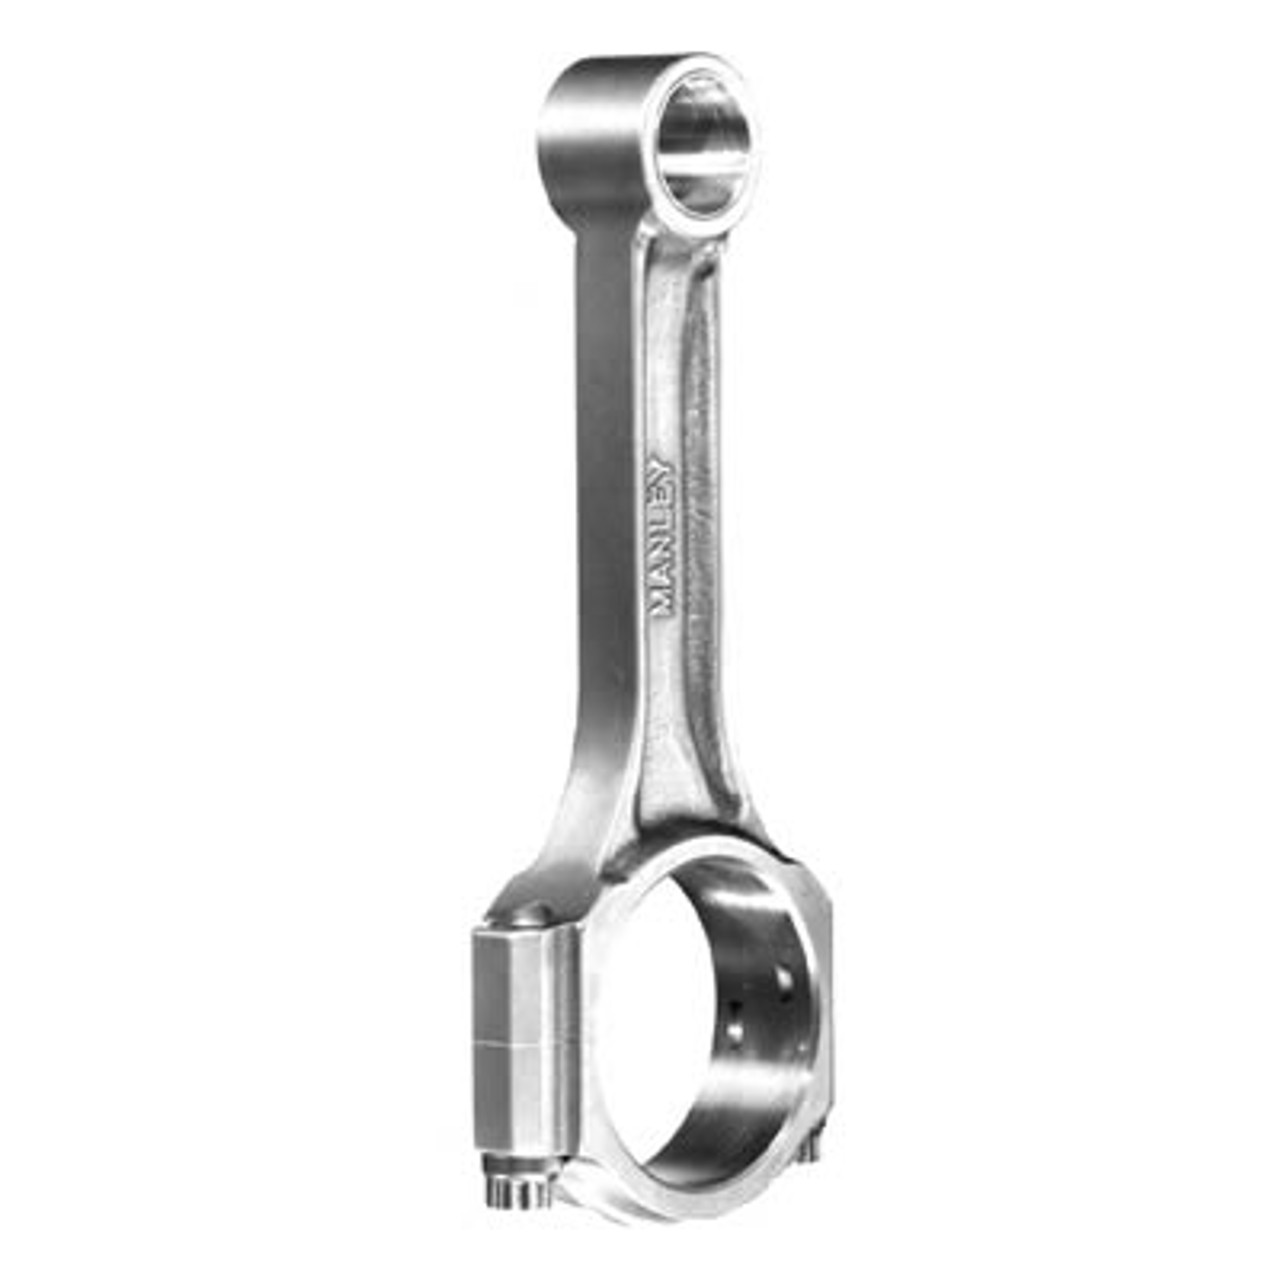 Manley Small Block Chevy .400 Inch Longer Sportsmaster Connecting Rods - 14114-8